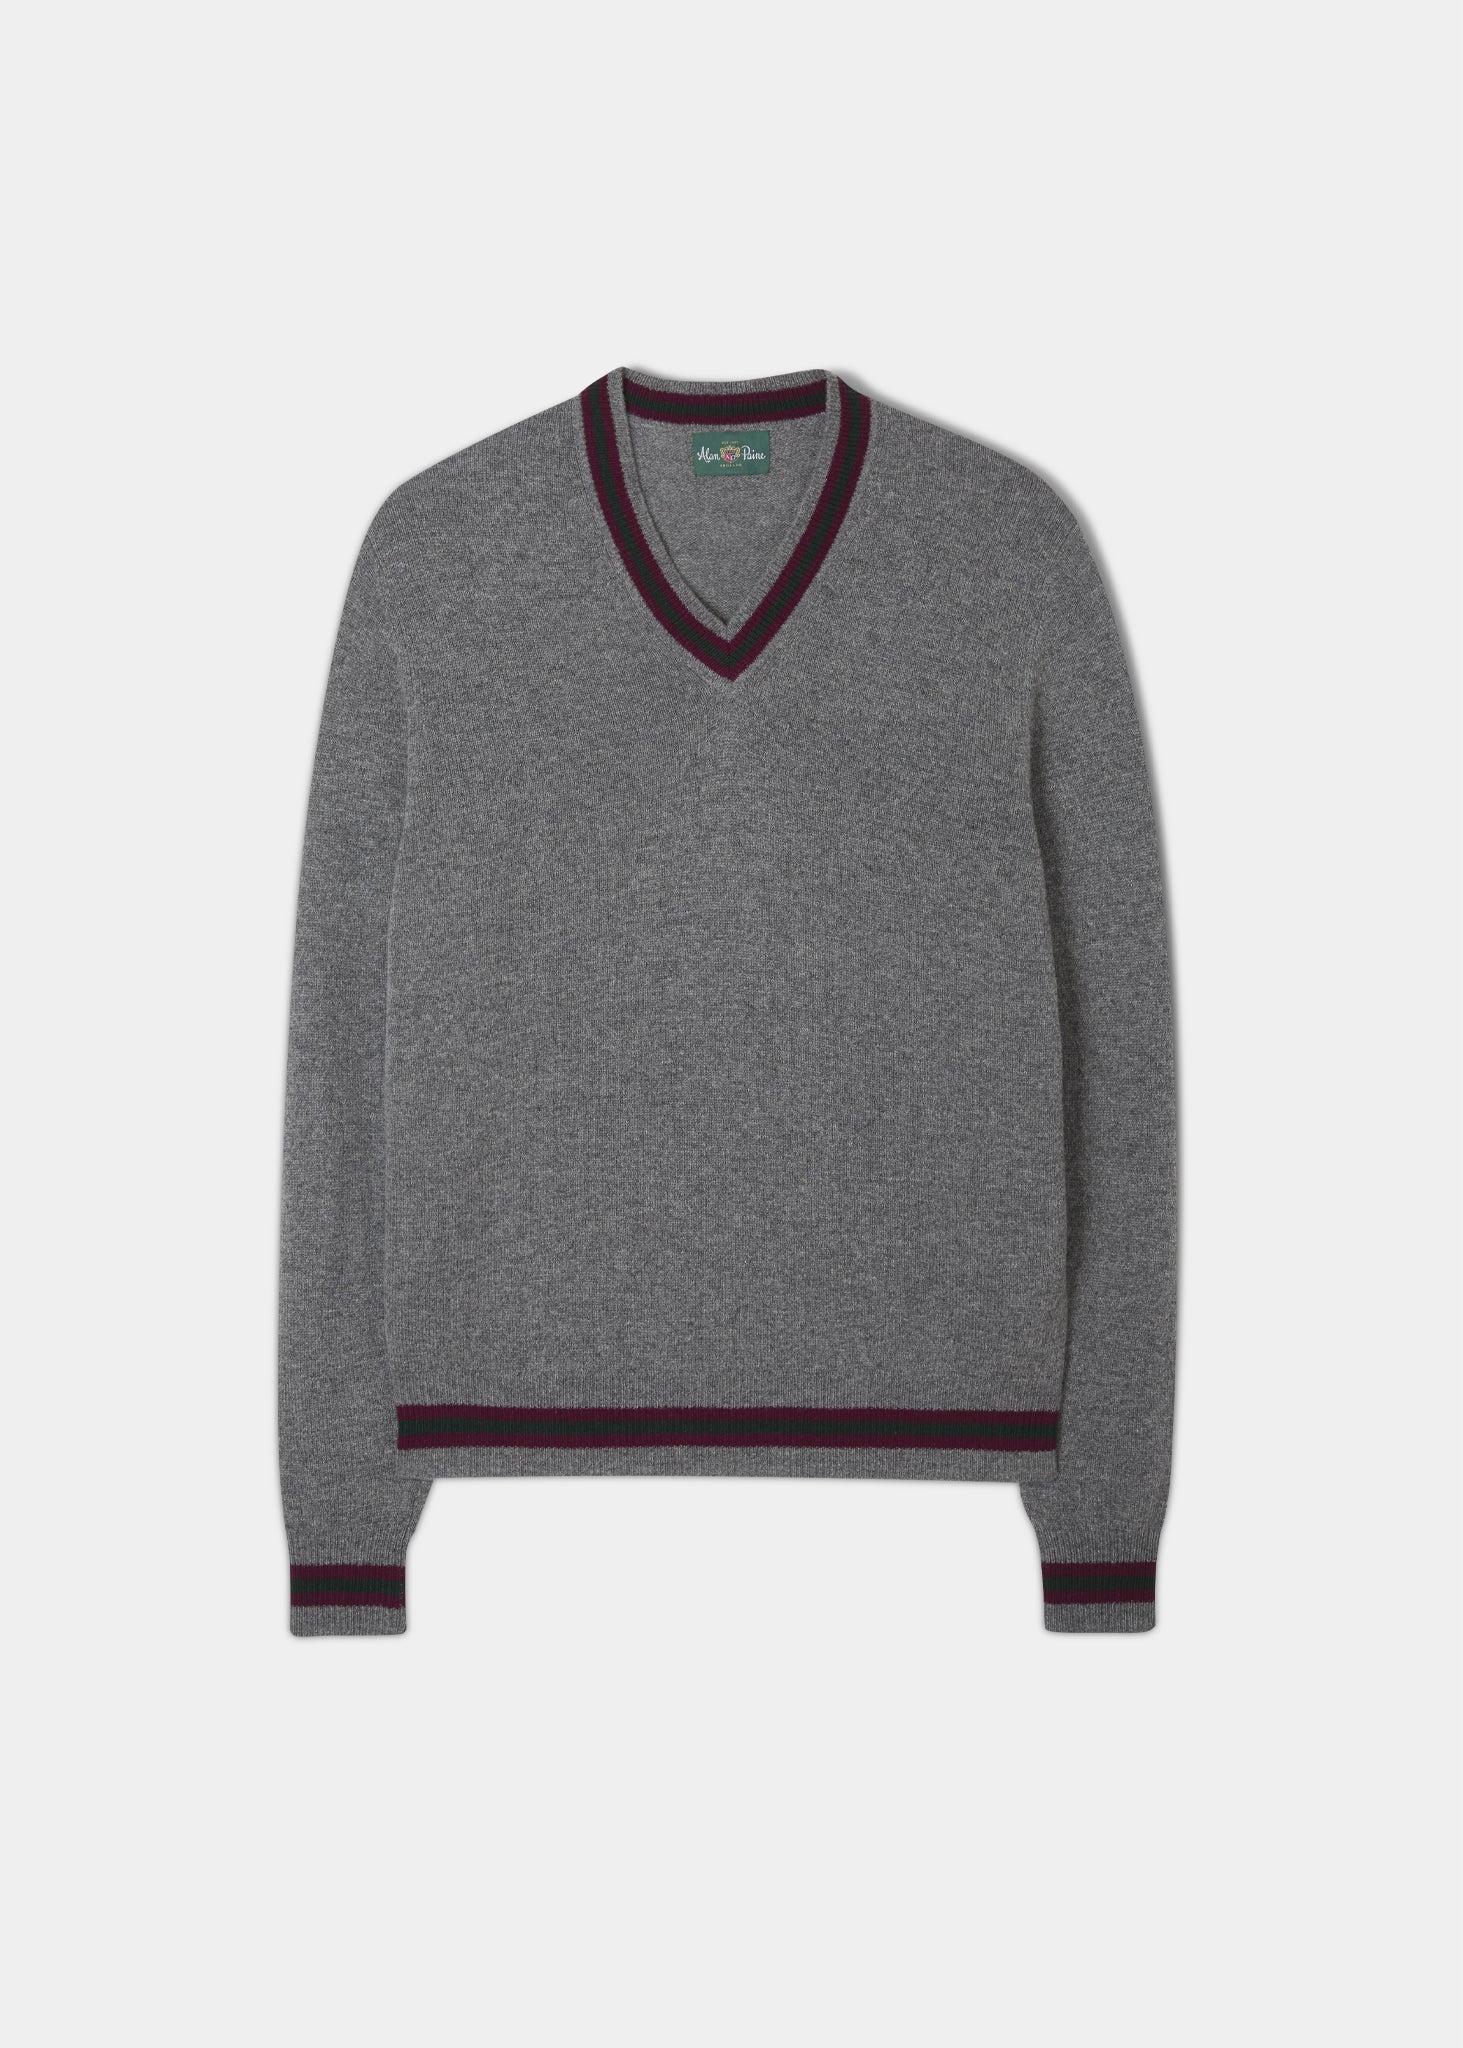 Limited Edition Commemorative Lambswool Sweater In Grey Mix